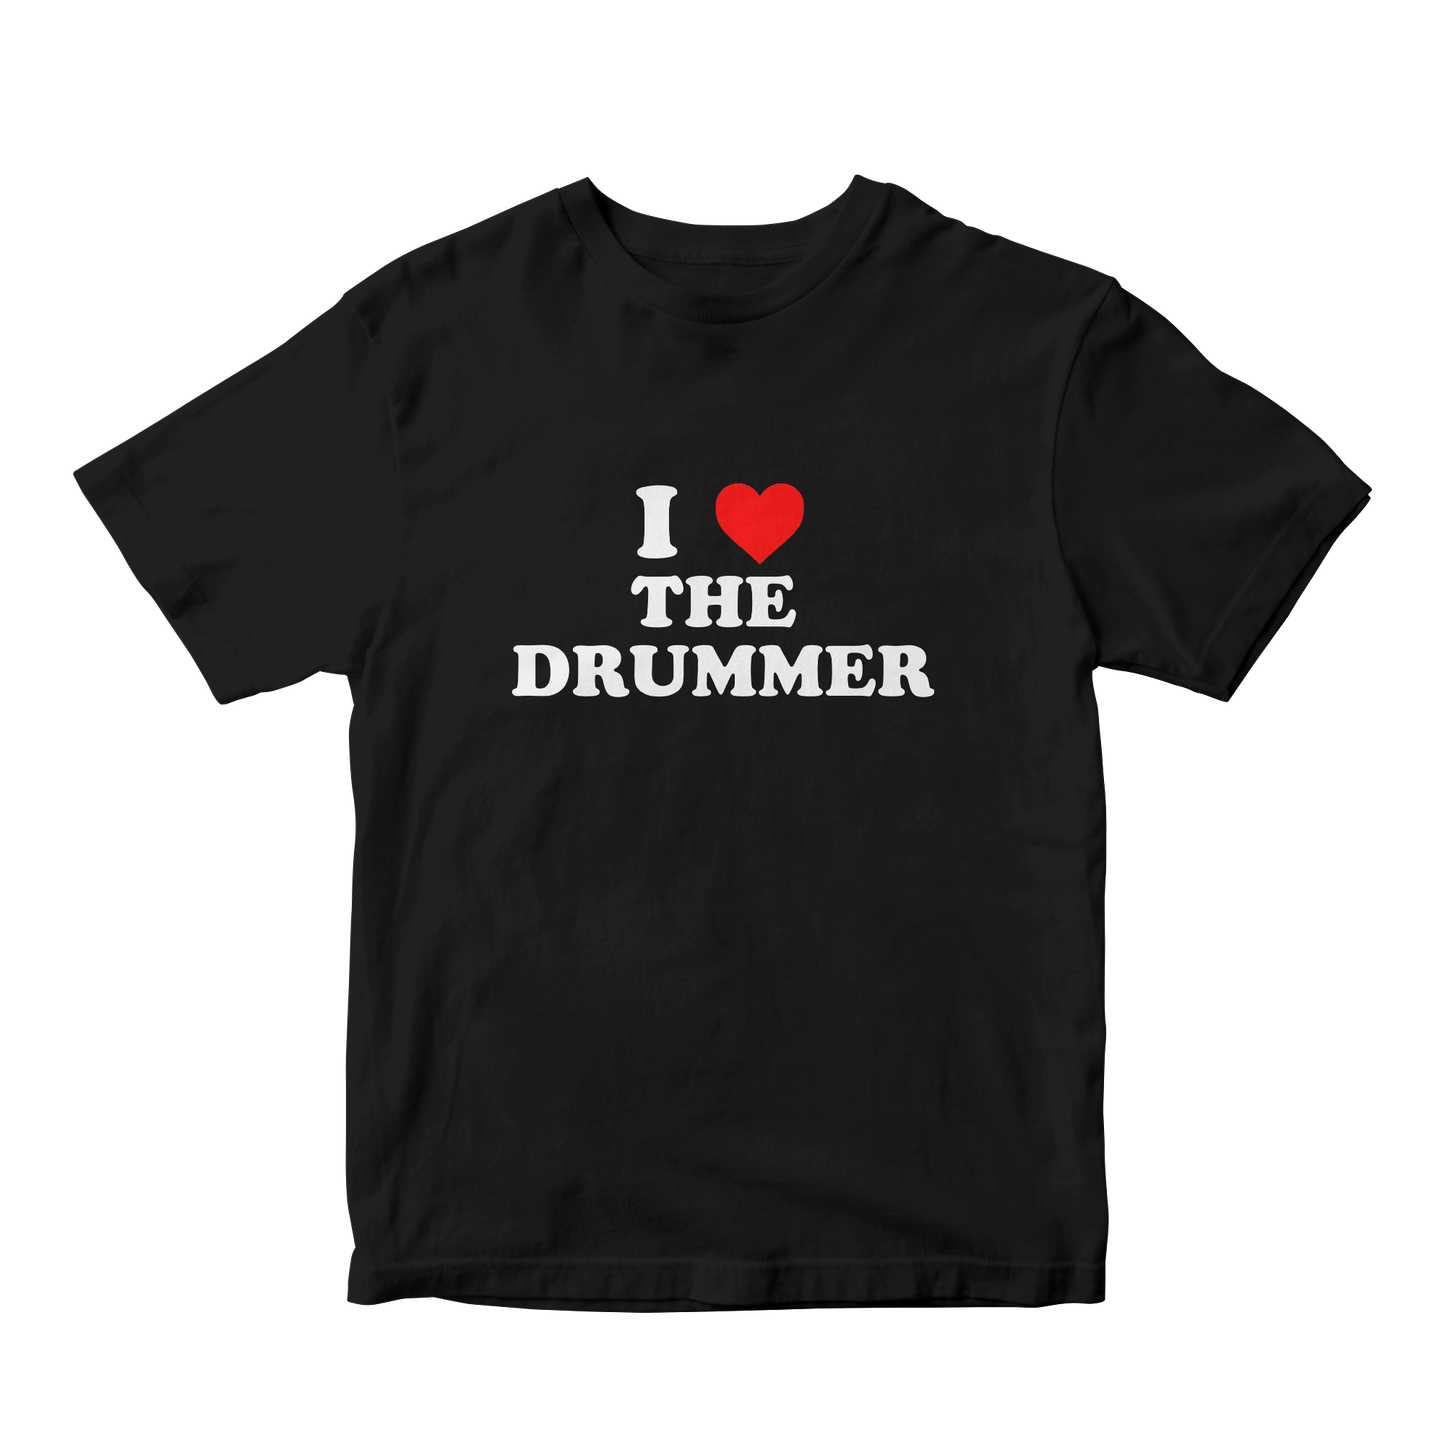 I ❤️ The Drummer Baby Tee